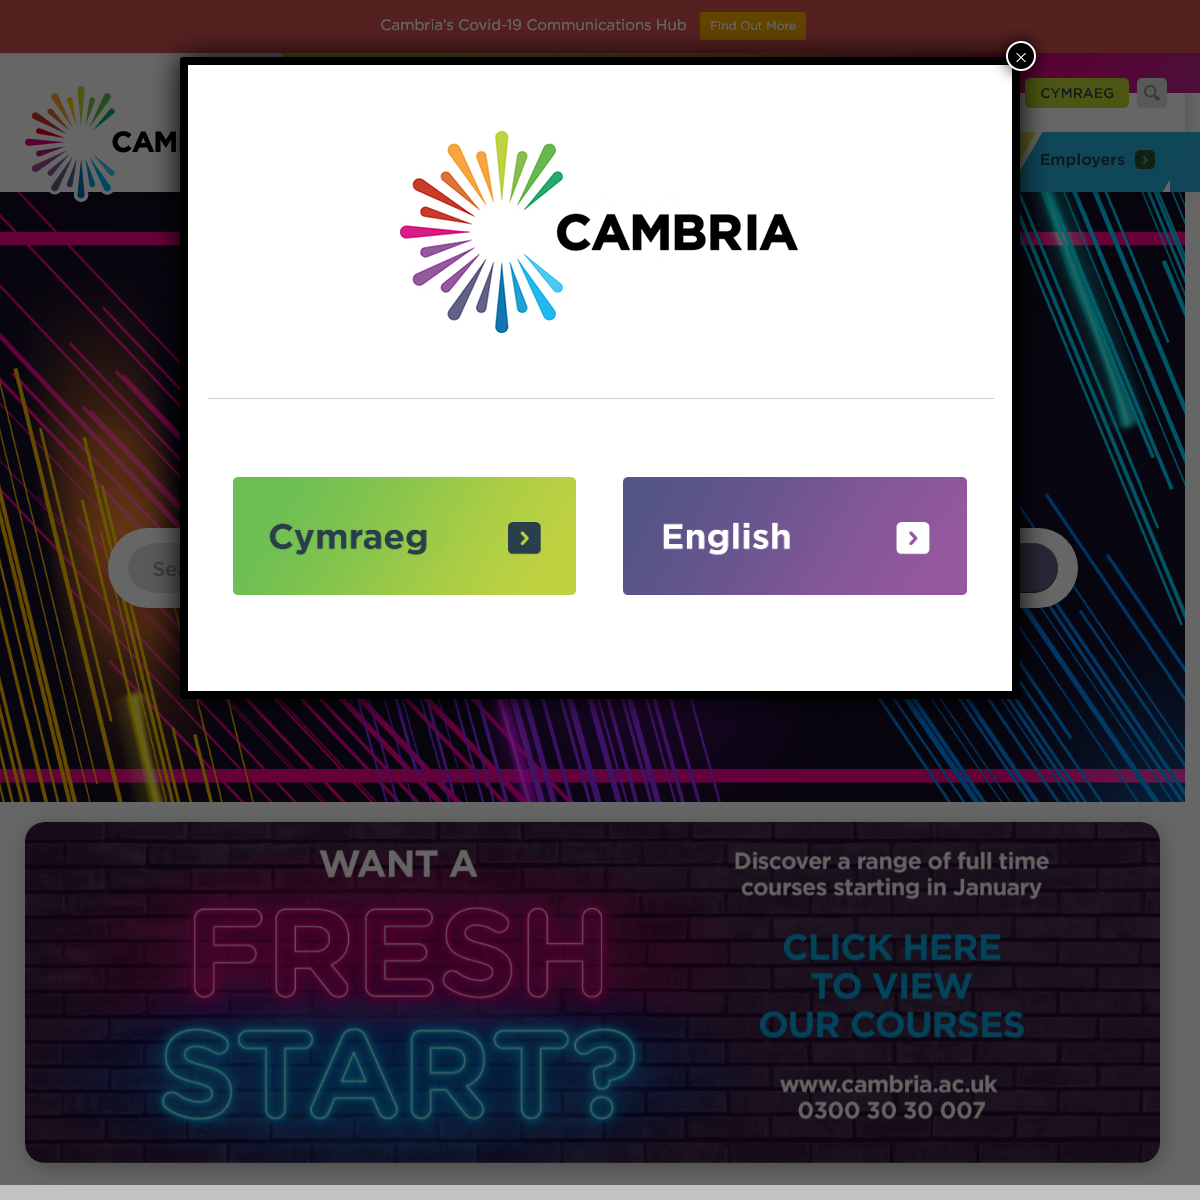 Coleg Cambria - An Officially Excellent College In North East Wales